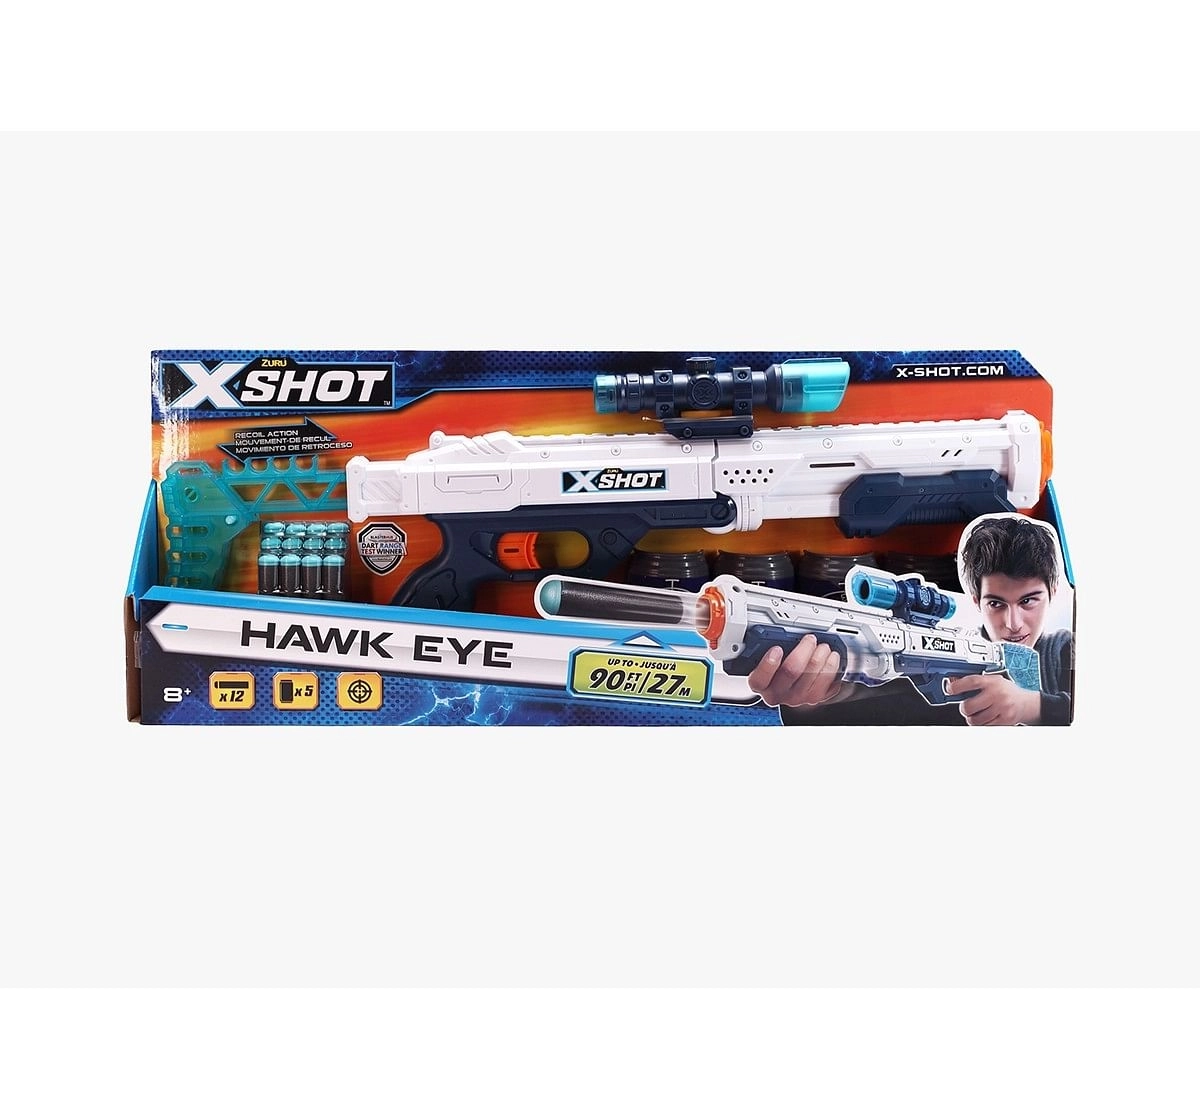 X-Shot Plastic Excel Hawk Eye 5 Cans With 12 Dart Blasters for Kids age 8Y+ (White)